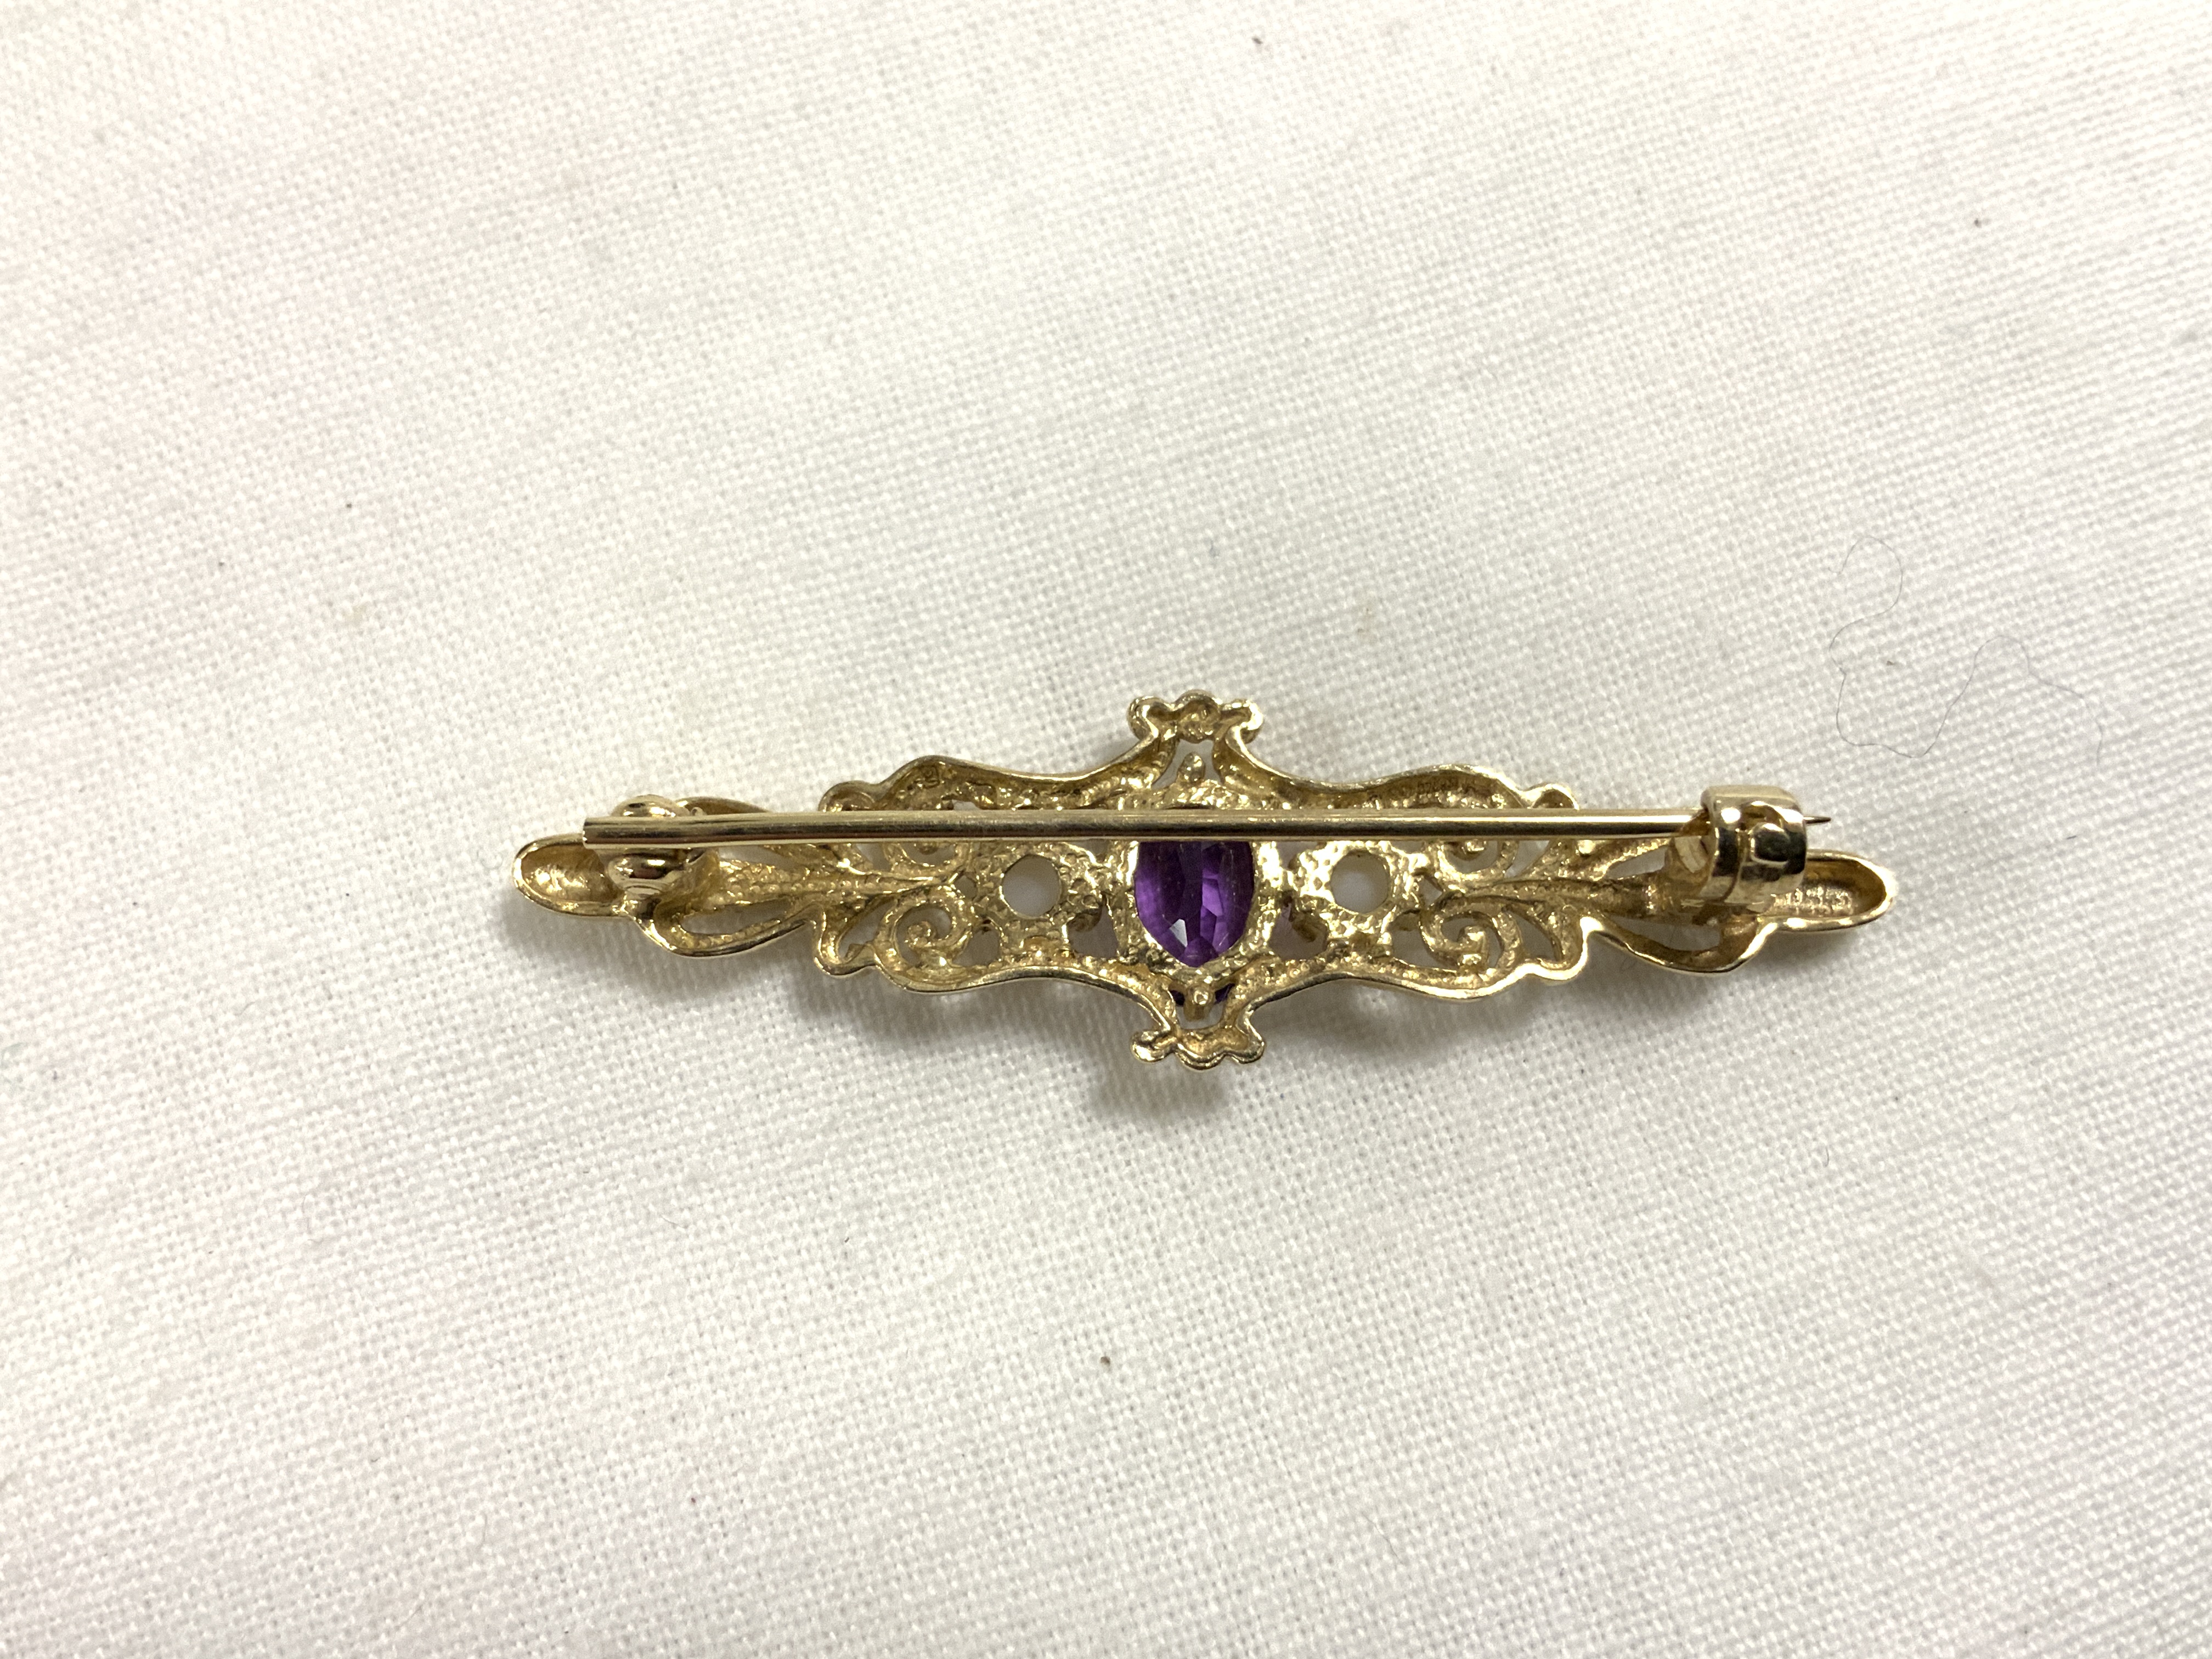 375 GOLD WITH PEARLS AND SINGLE AMETHYST STONE BROOCH - Image 3 of 3